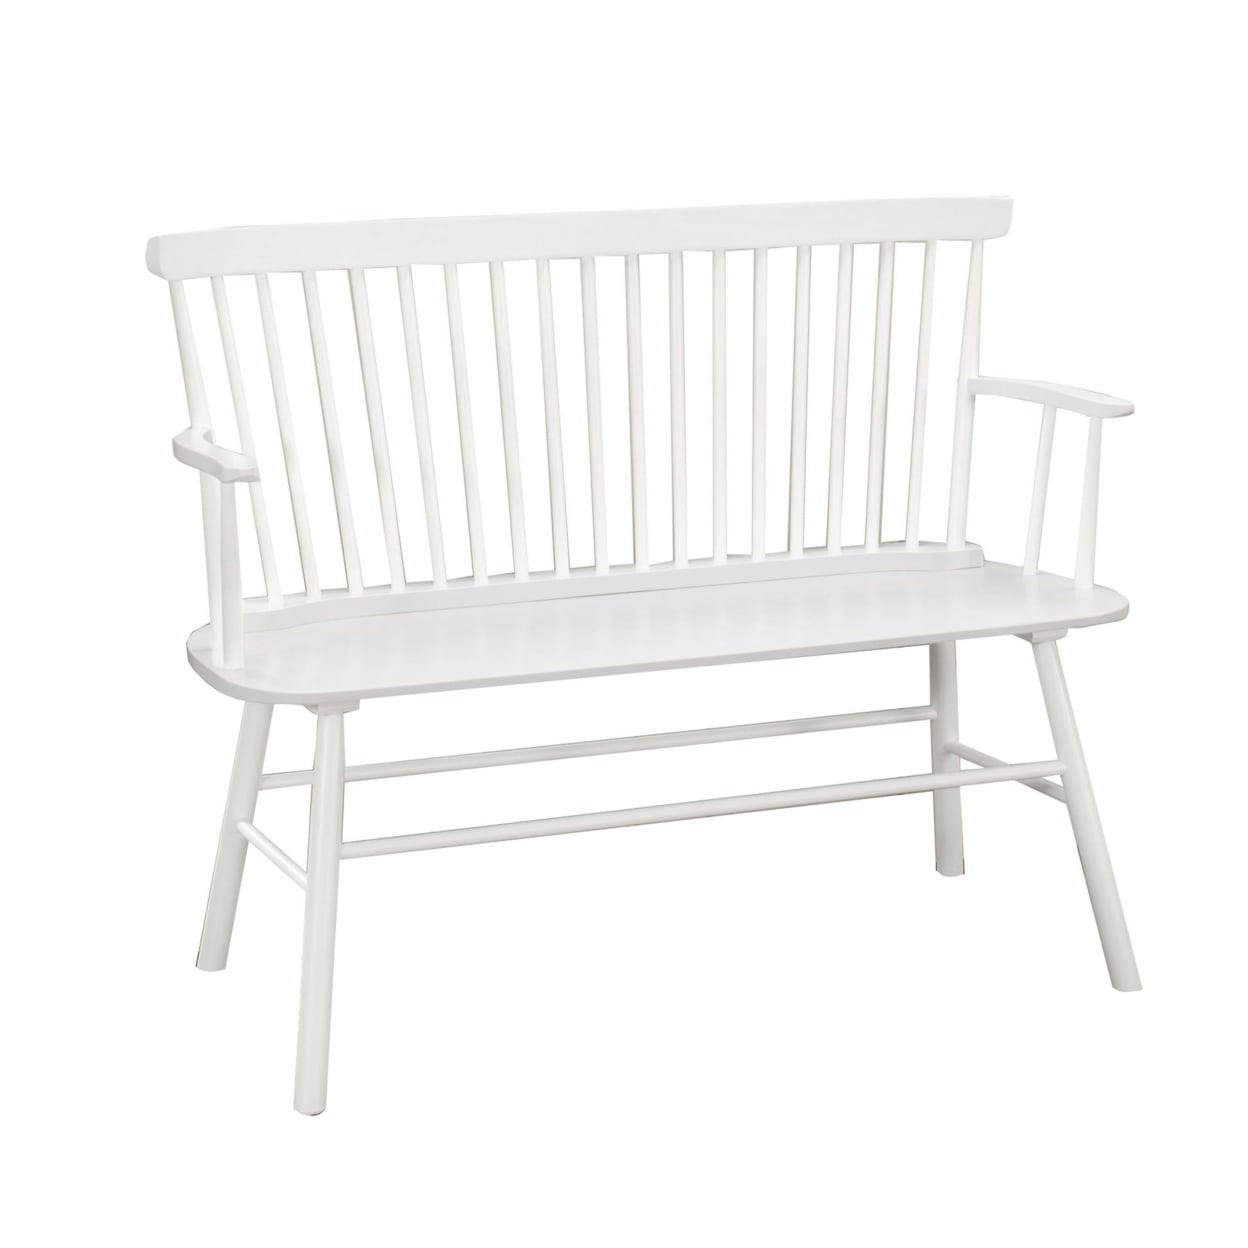 Transitional Curved Design Spindle Back Bench with Splayed Legs,White- Saltoro Sherpi